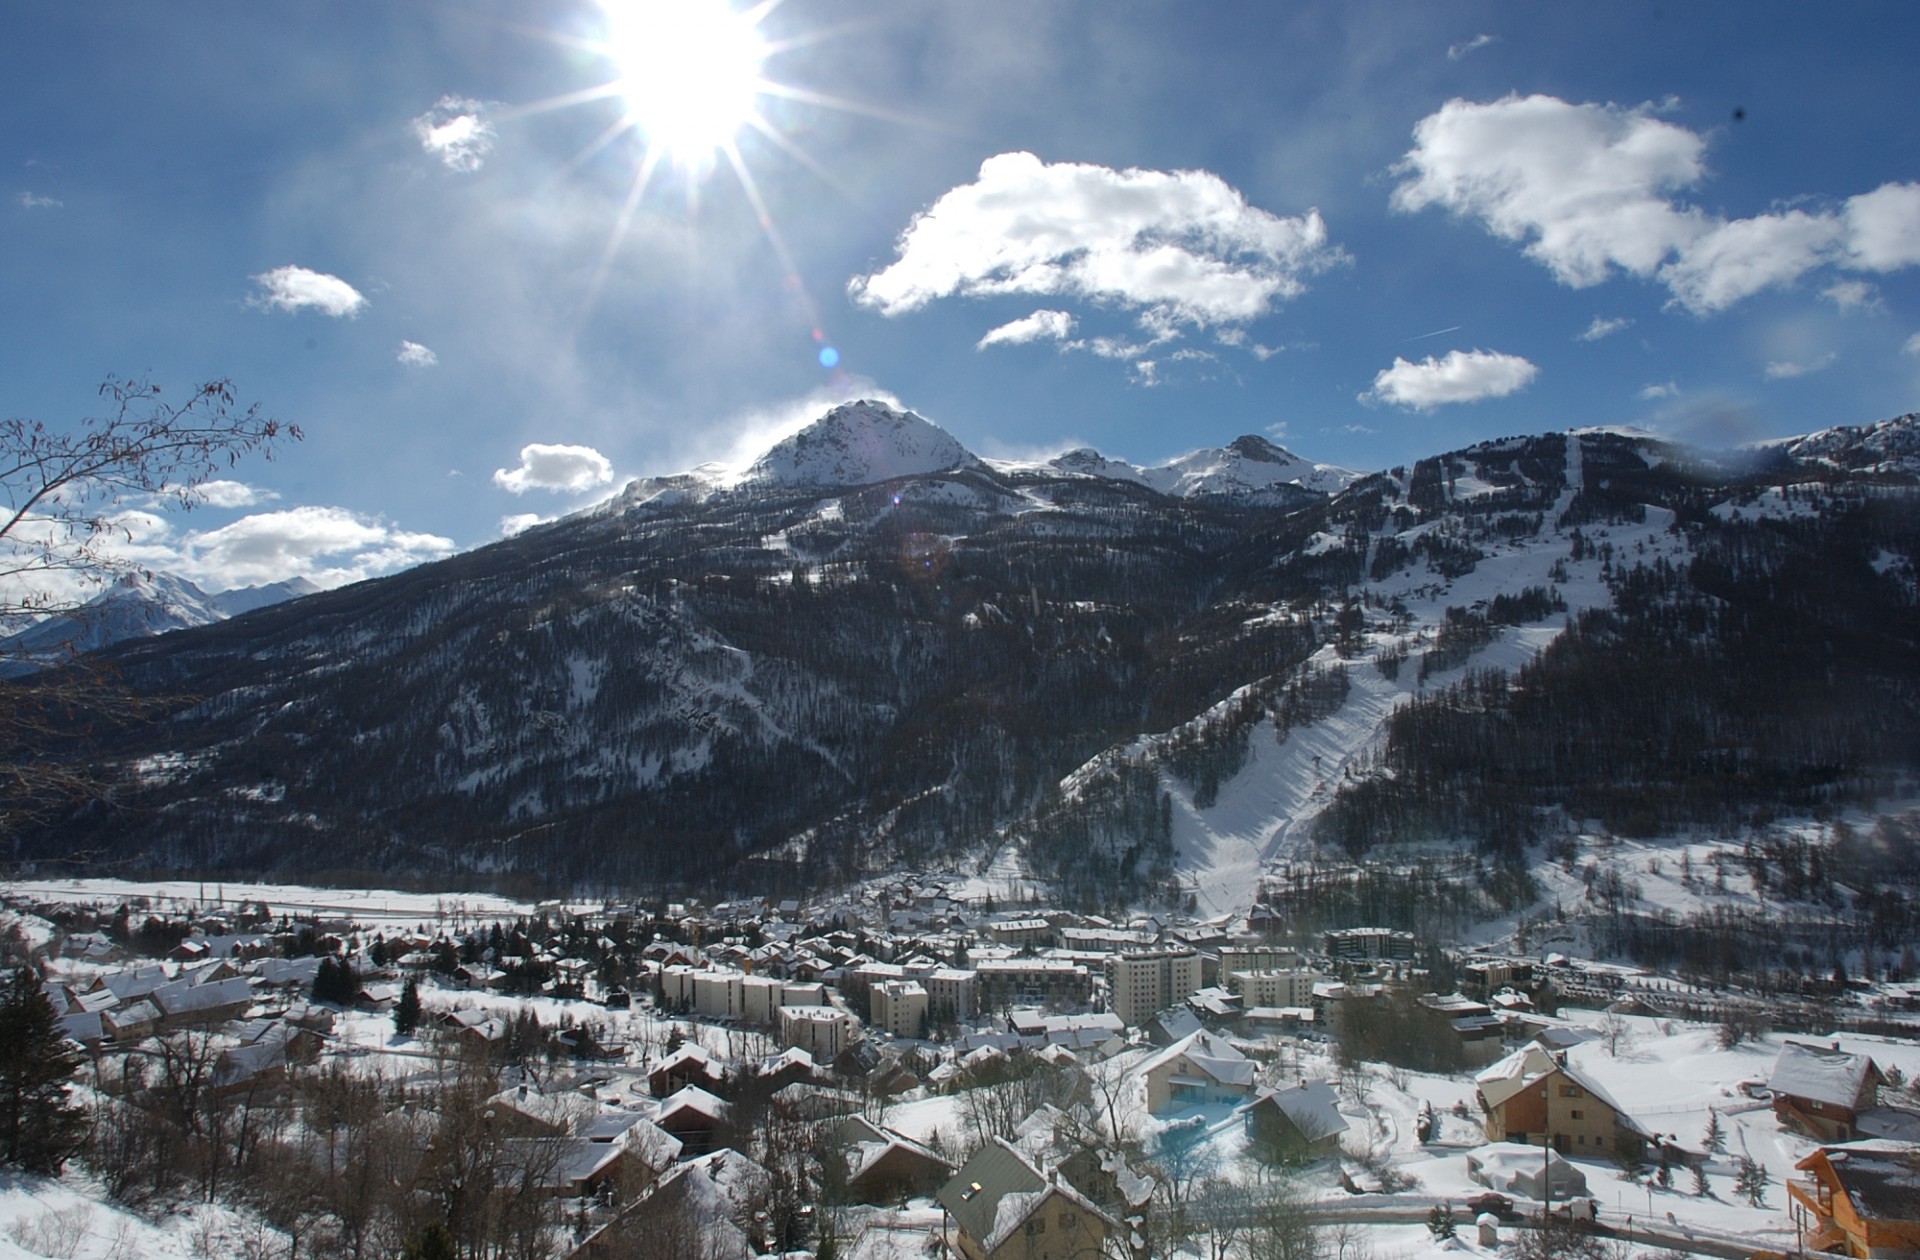 Self-catering accommodation Serre Chevalier Chantemerle